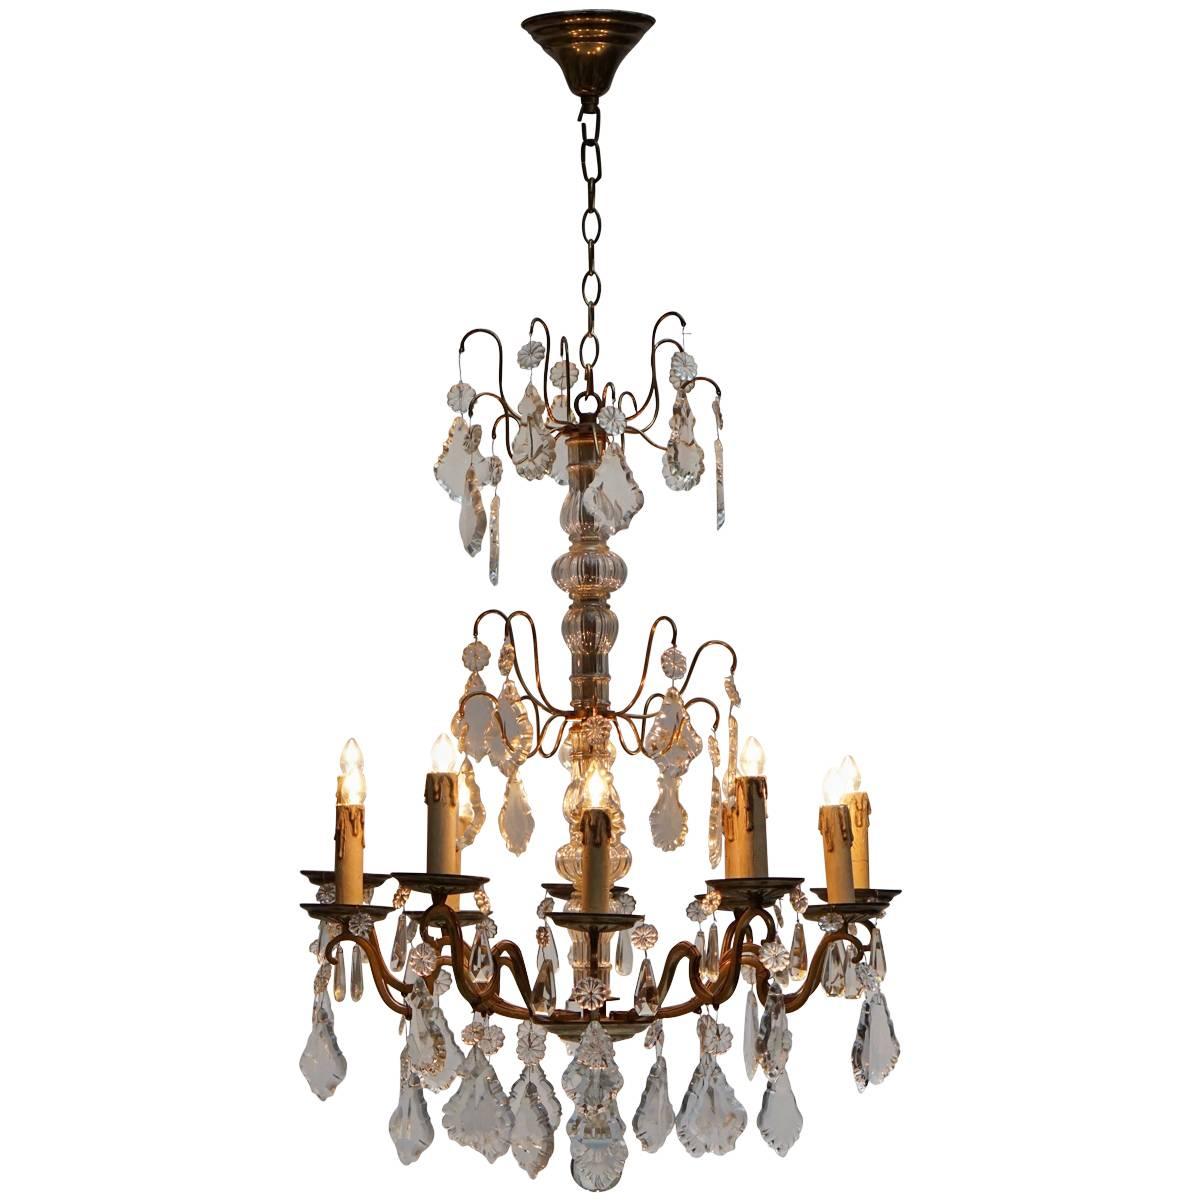 Brass and Cristal Glass Chandelier For Sale